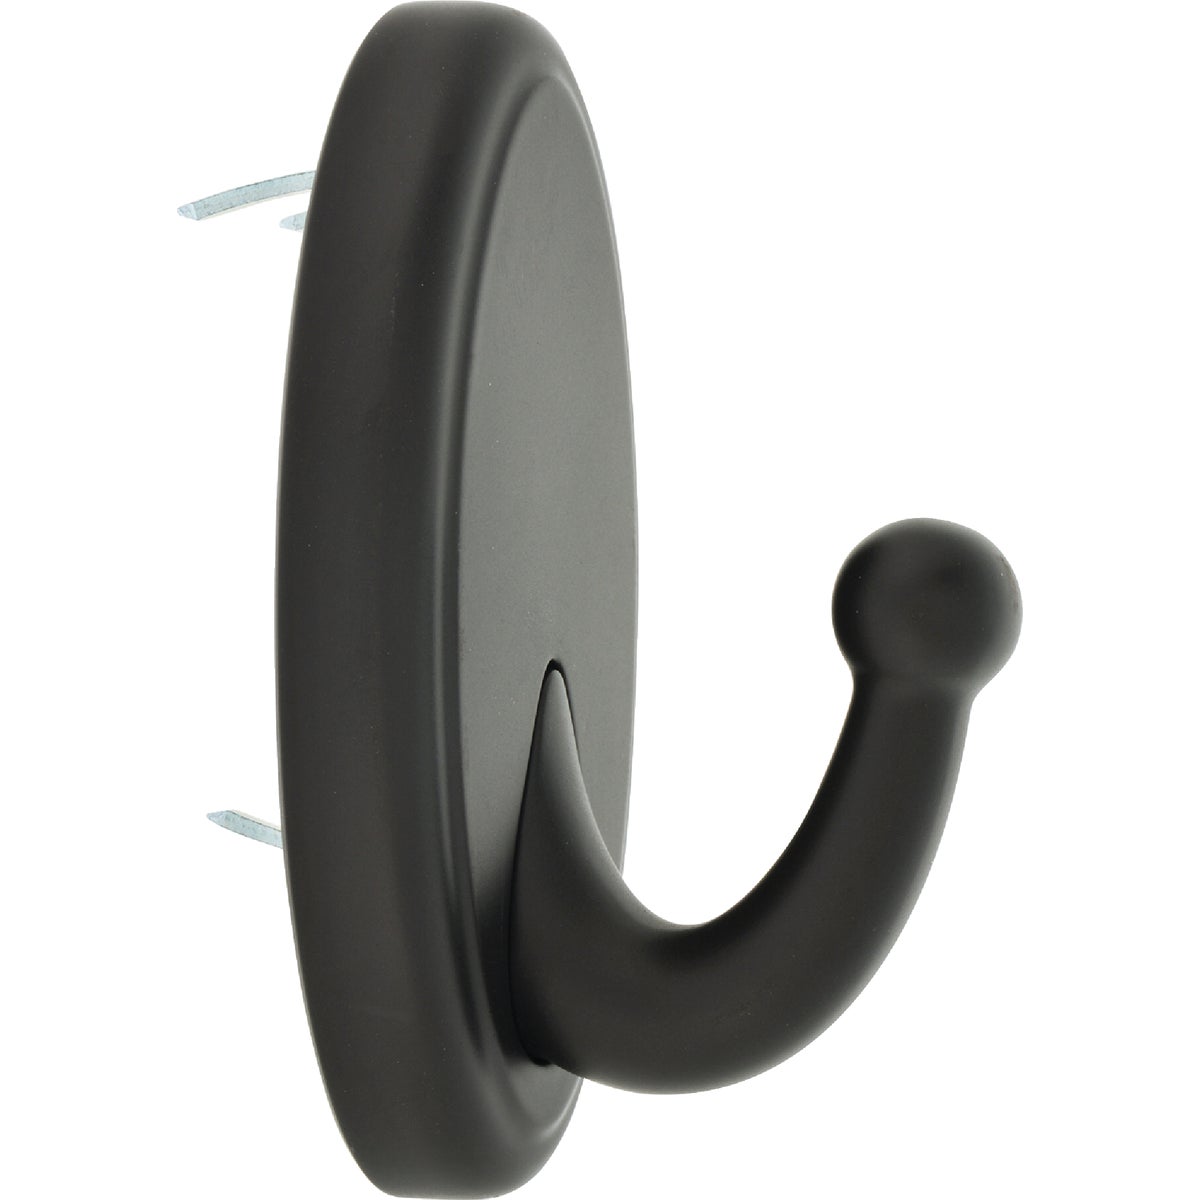 Hillman Fastener High and Mighty Oval Oil Rubbed Bronze Plastic Wall Hook